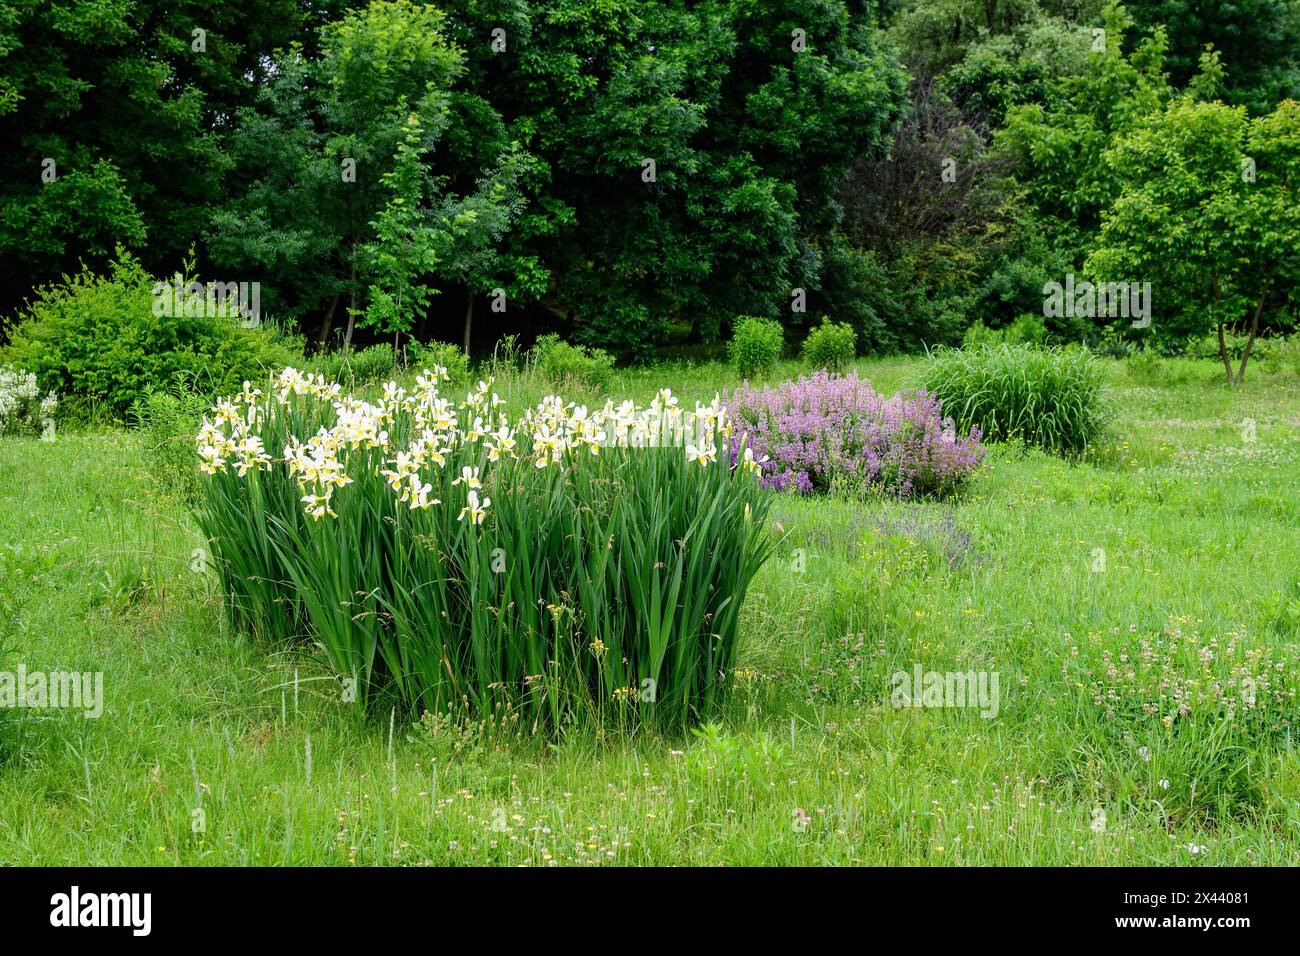 Vivid landscape in Alexandru Buia Botanical Garden from Craiova in Dolj county, Romania, with flowers, grass and large green tres in a beautiful sunny Stock Photo